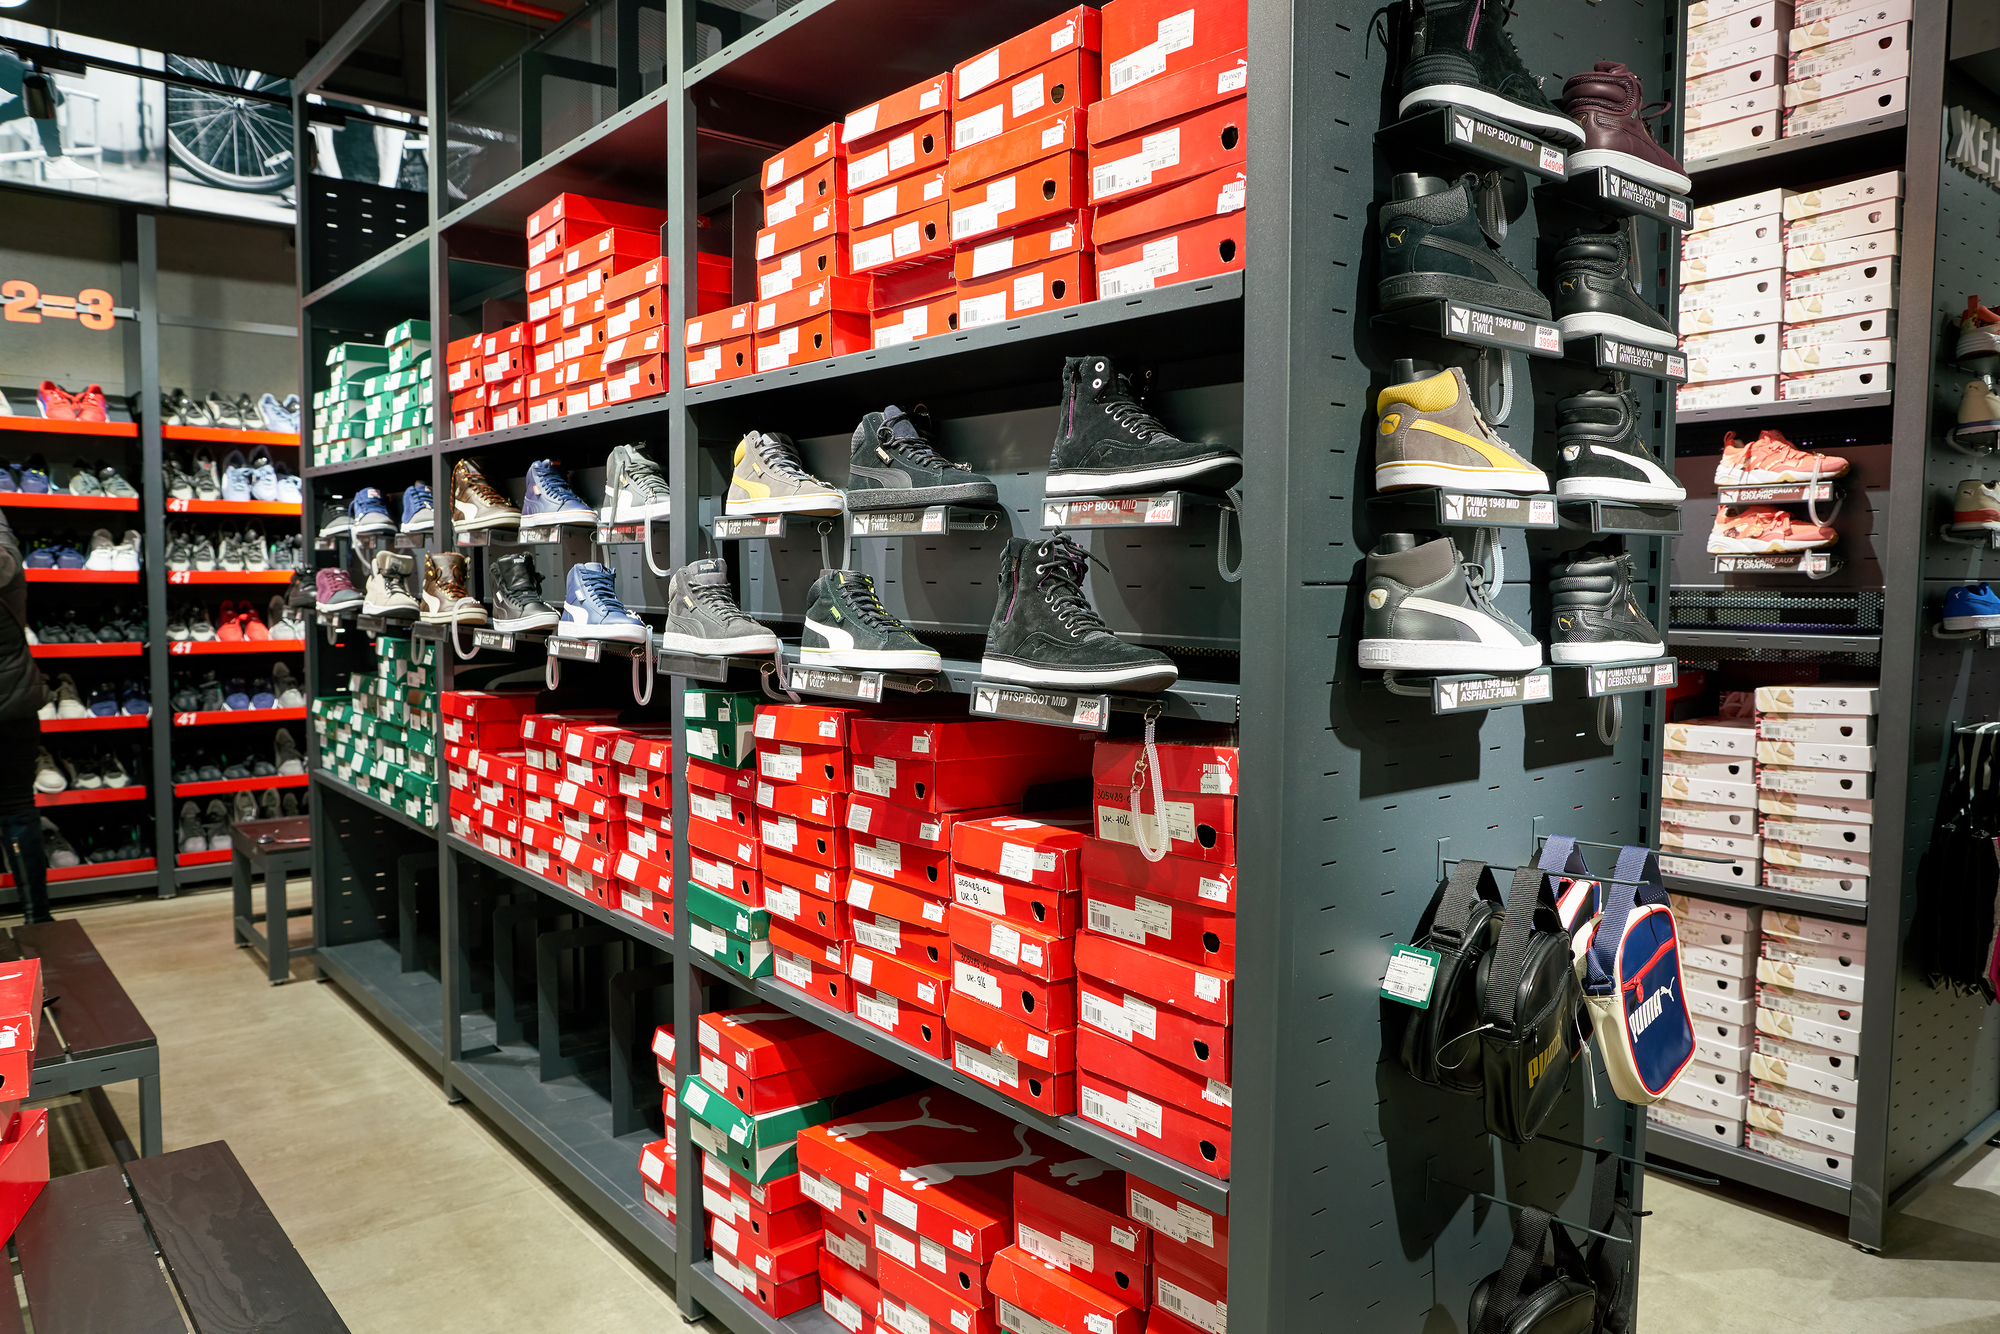 Rows of Nike sneakers displayed on shelves in a shoe store with stacks of shoeboxes lining the wall.